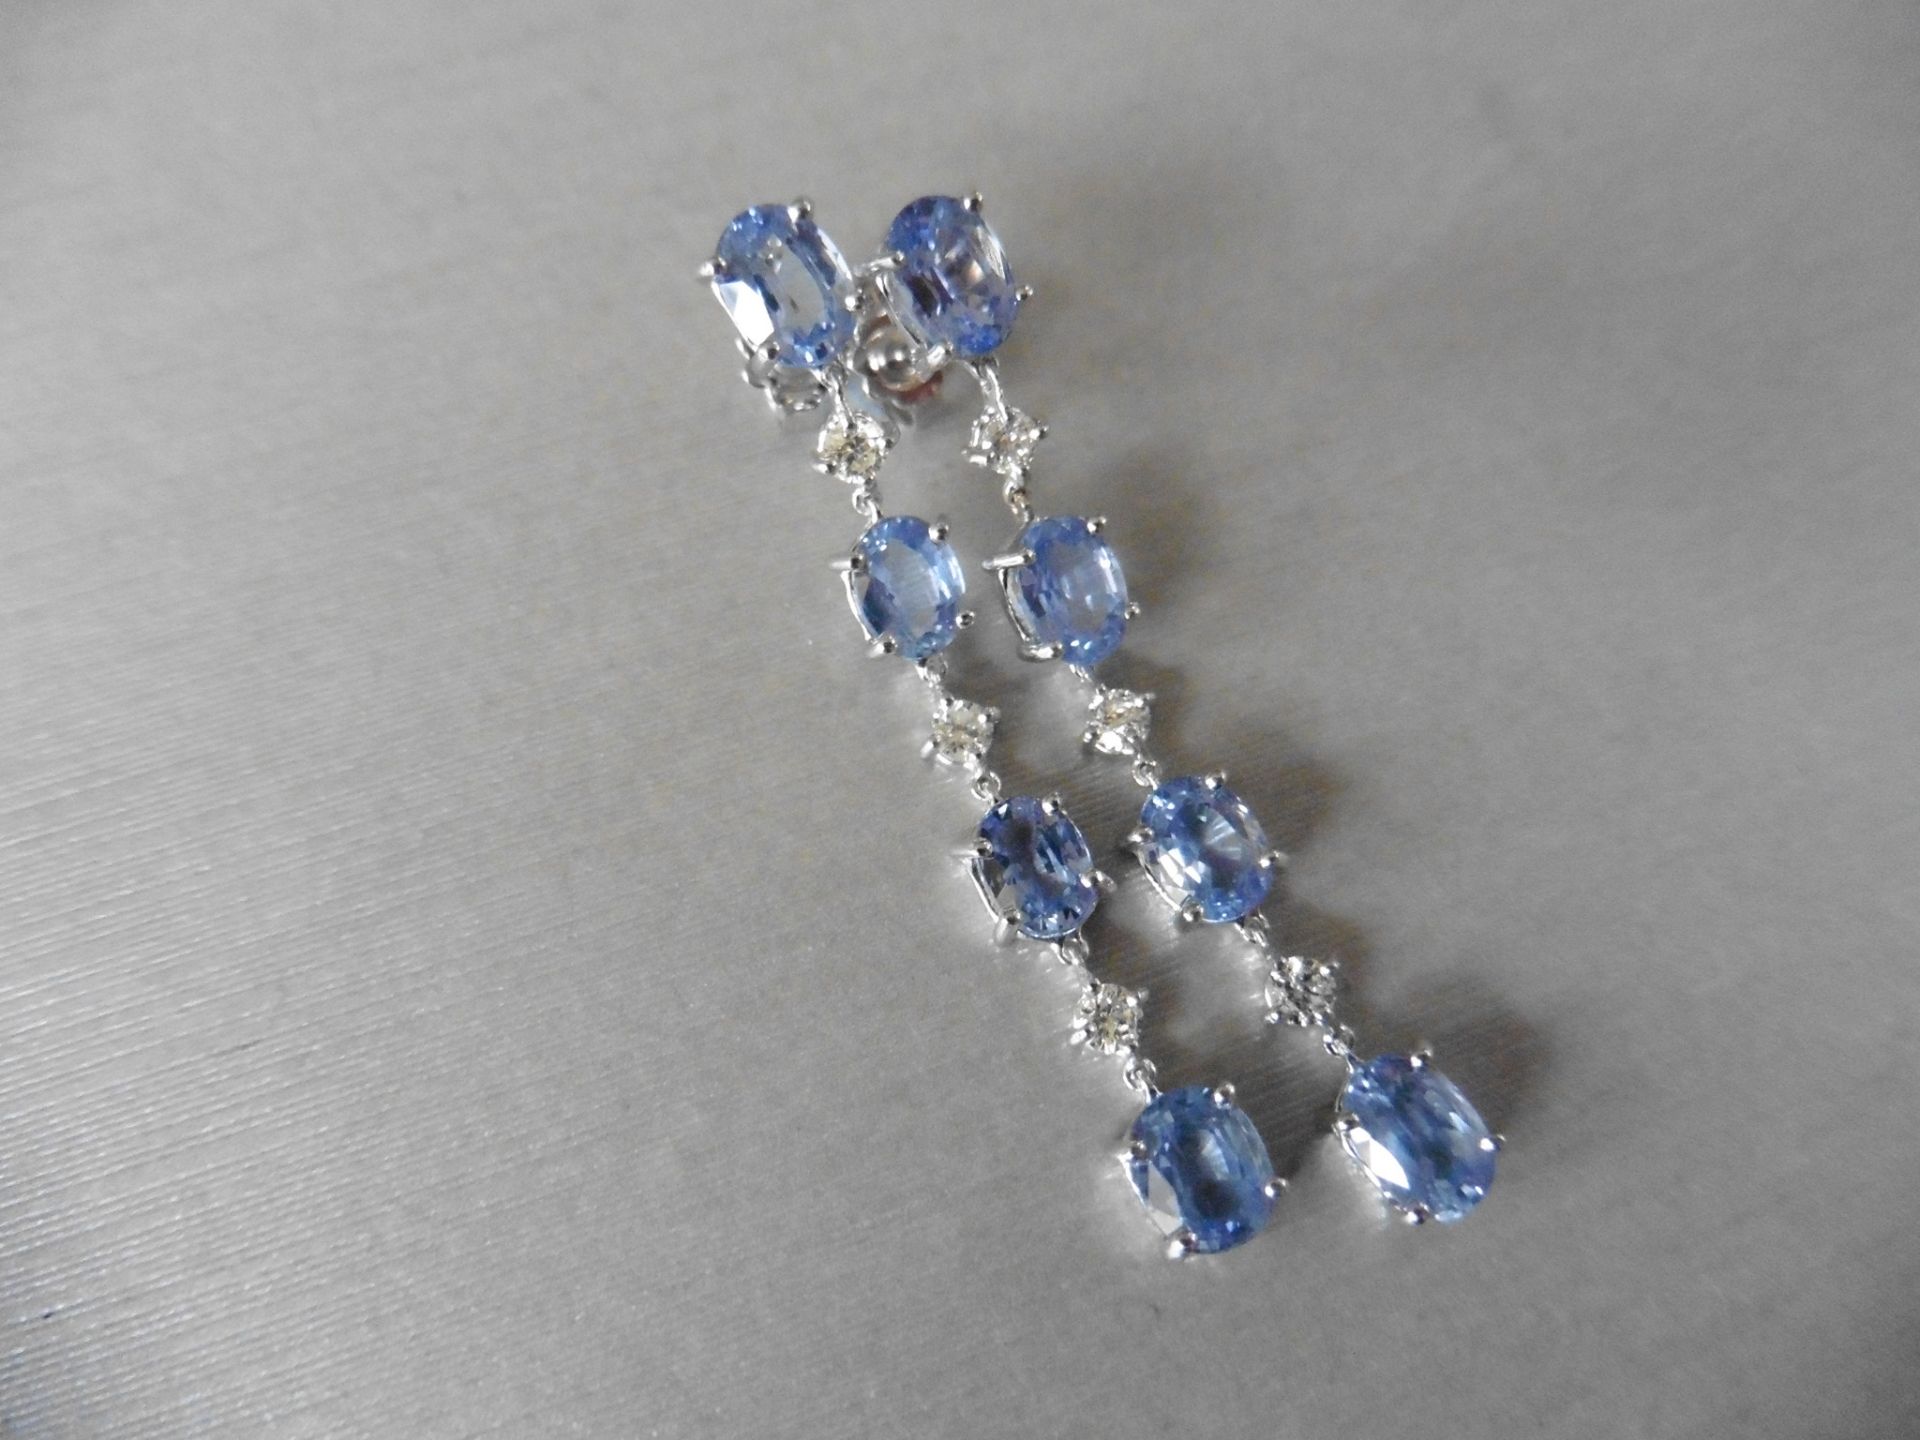 3ct ceylon sapphire and diamond drop earrings. Each set with 4 oval cut sapphires and 3 brilliant